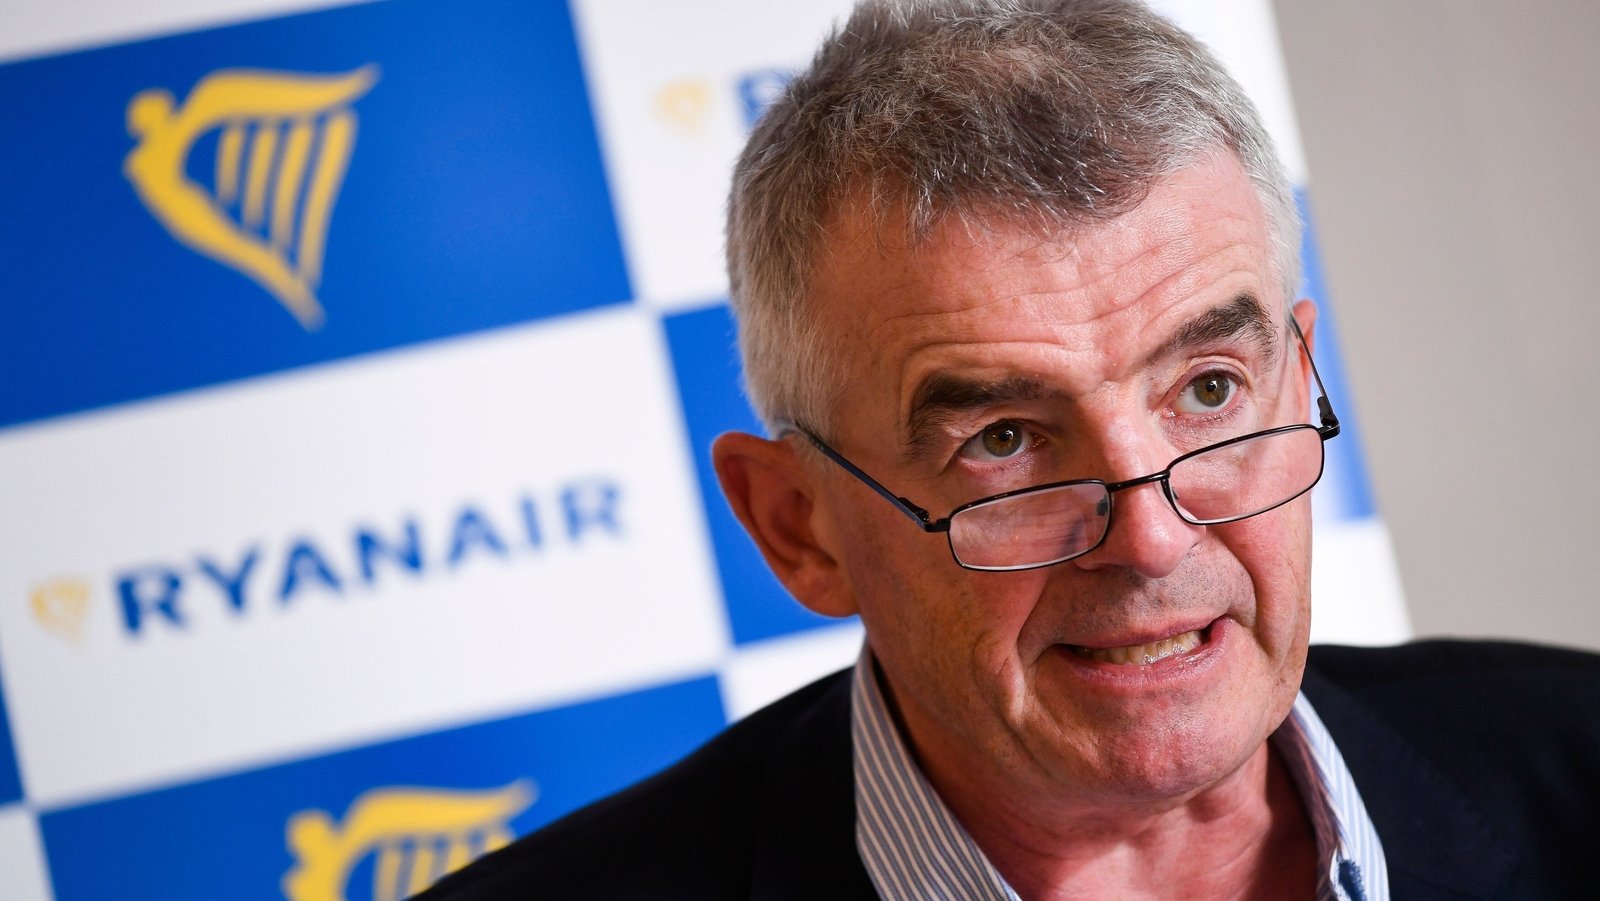 Ryanair raises its balance sheet with a $ 400 million share placement

